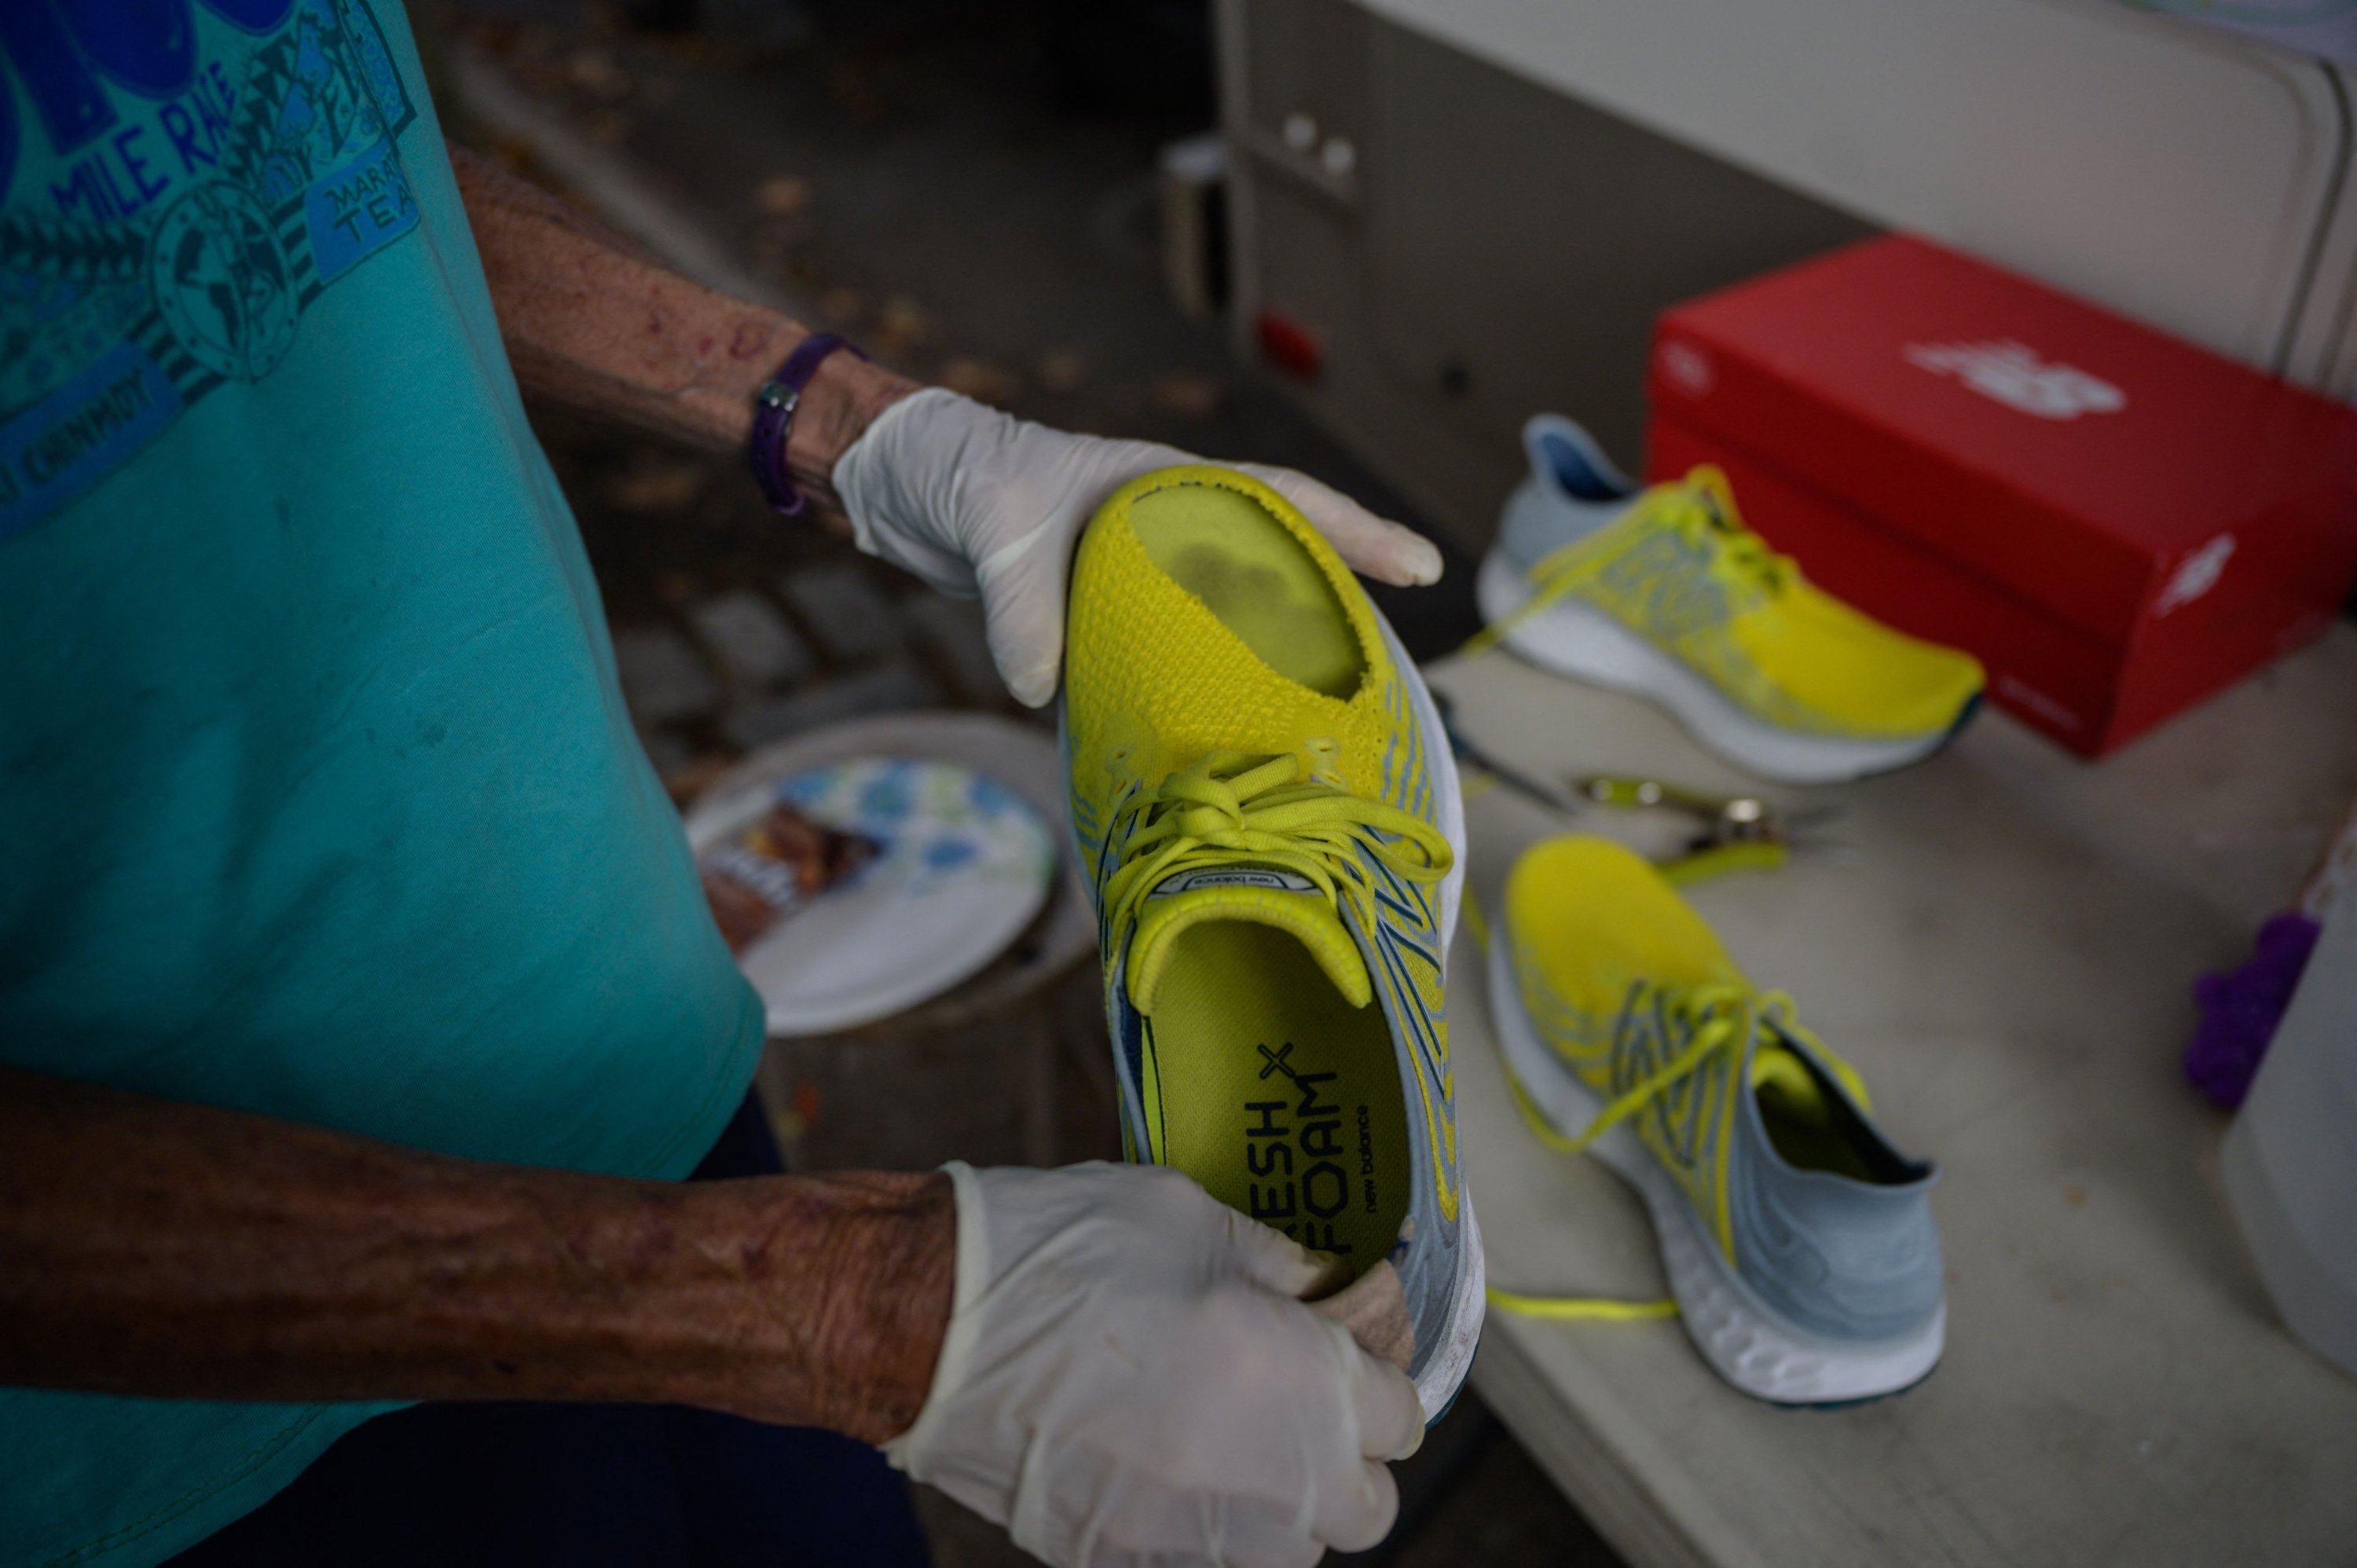 A technician checks the shoes of Harita Davies of New Zealand during the 'Self-Transcendence 3100 Mile Race,' the world's longest certified foot race, in Queens, New York, U.S., Oct. 17, 2021. (AFP Photo)